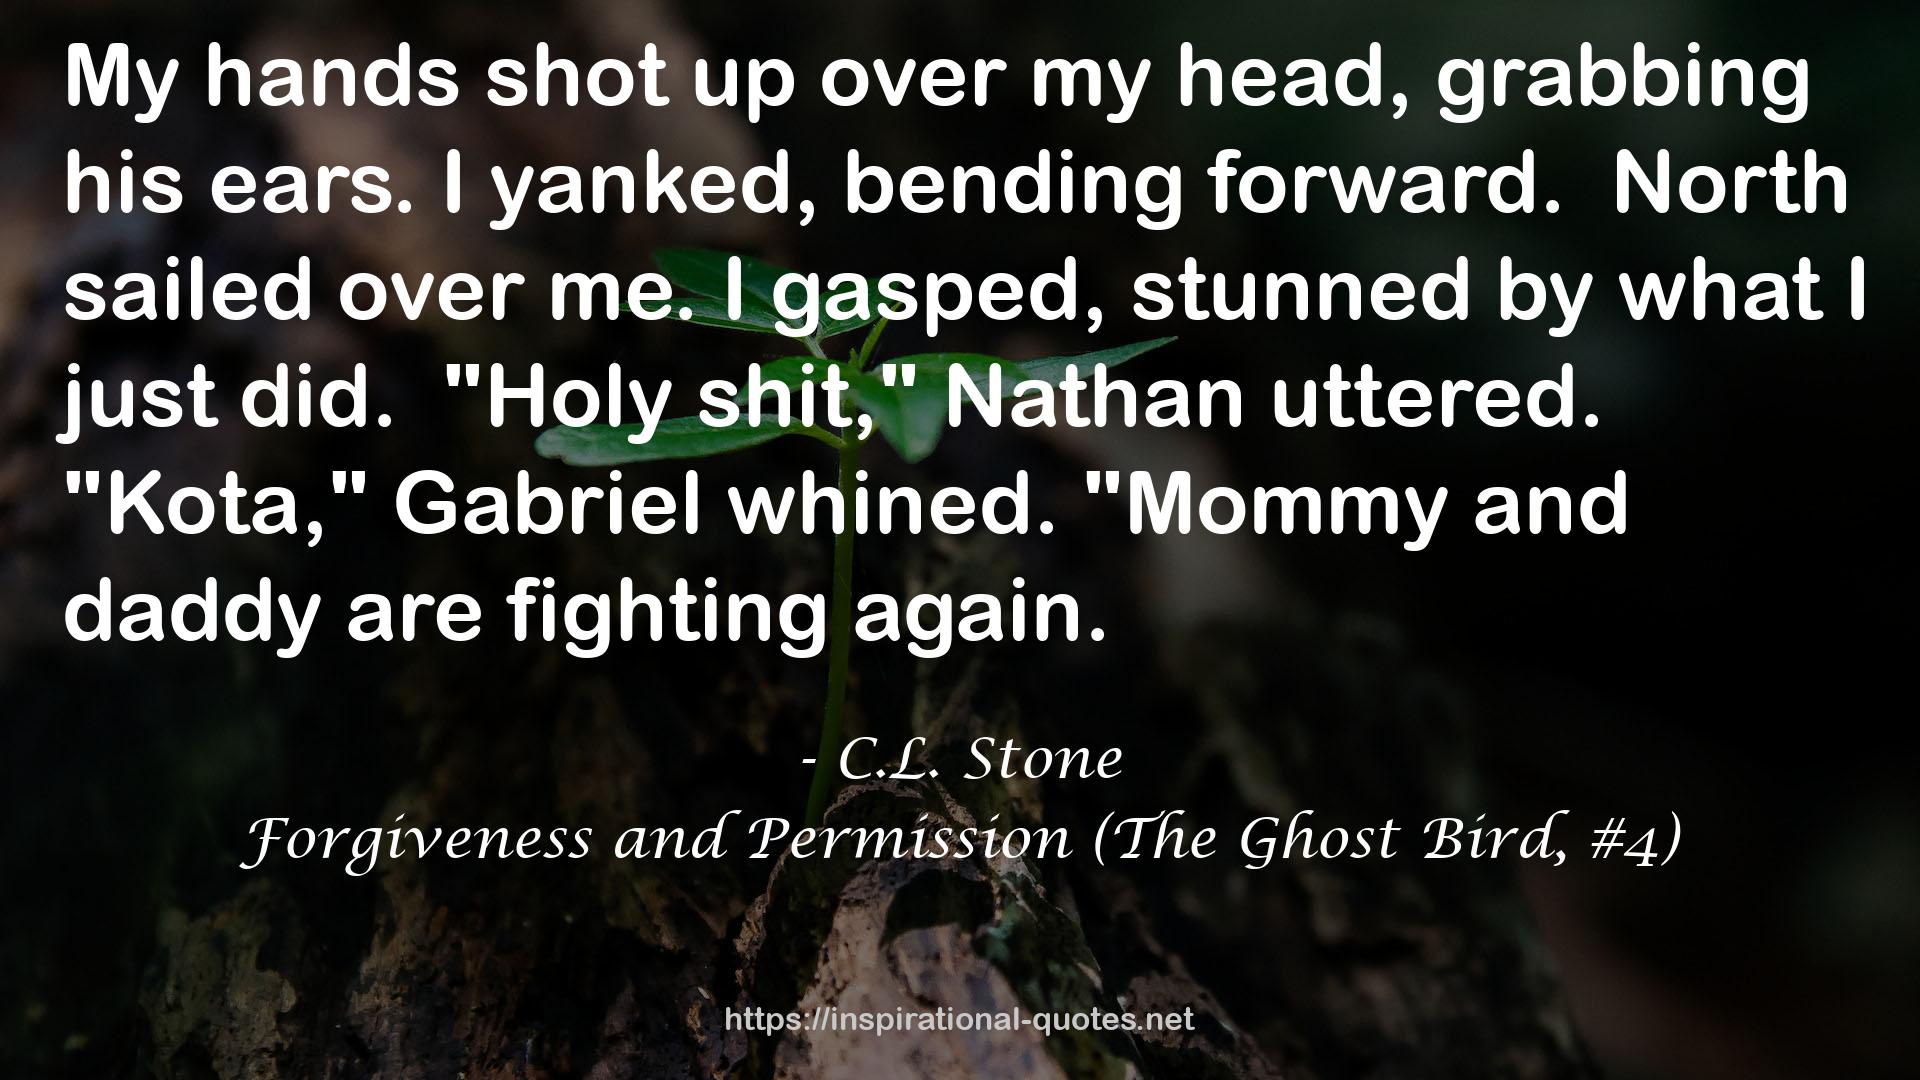 Forgiveness and Permission (The Ghost Bird, #4) QUOTES